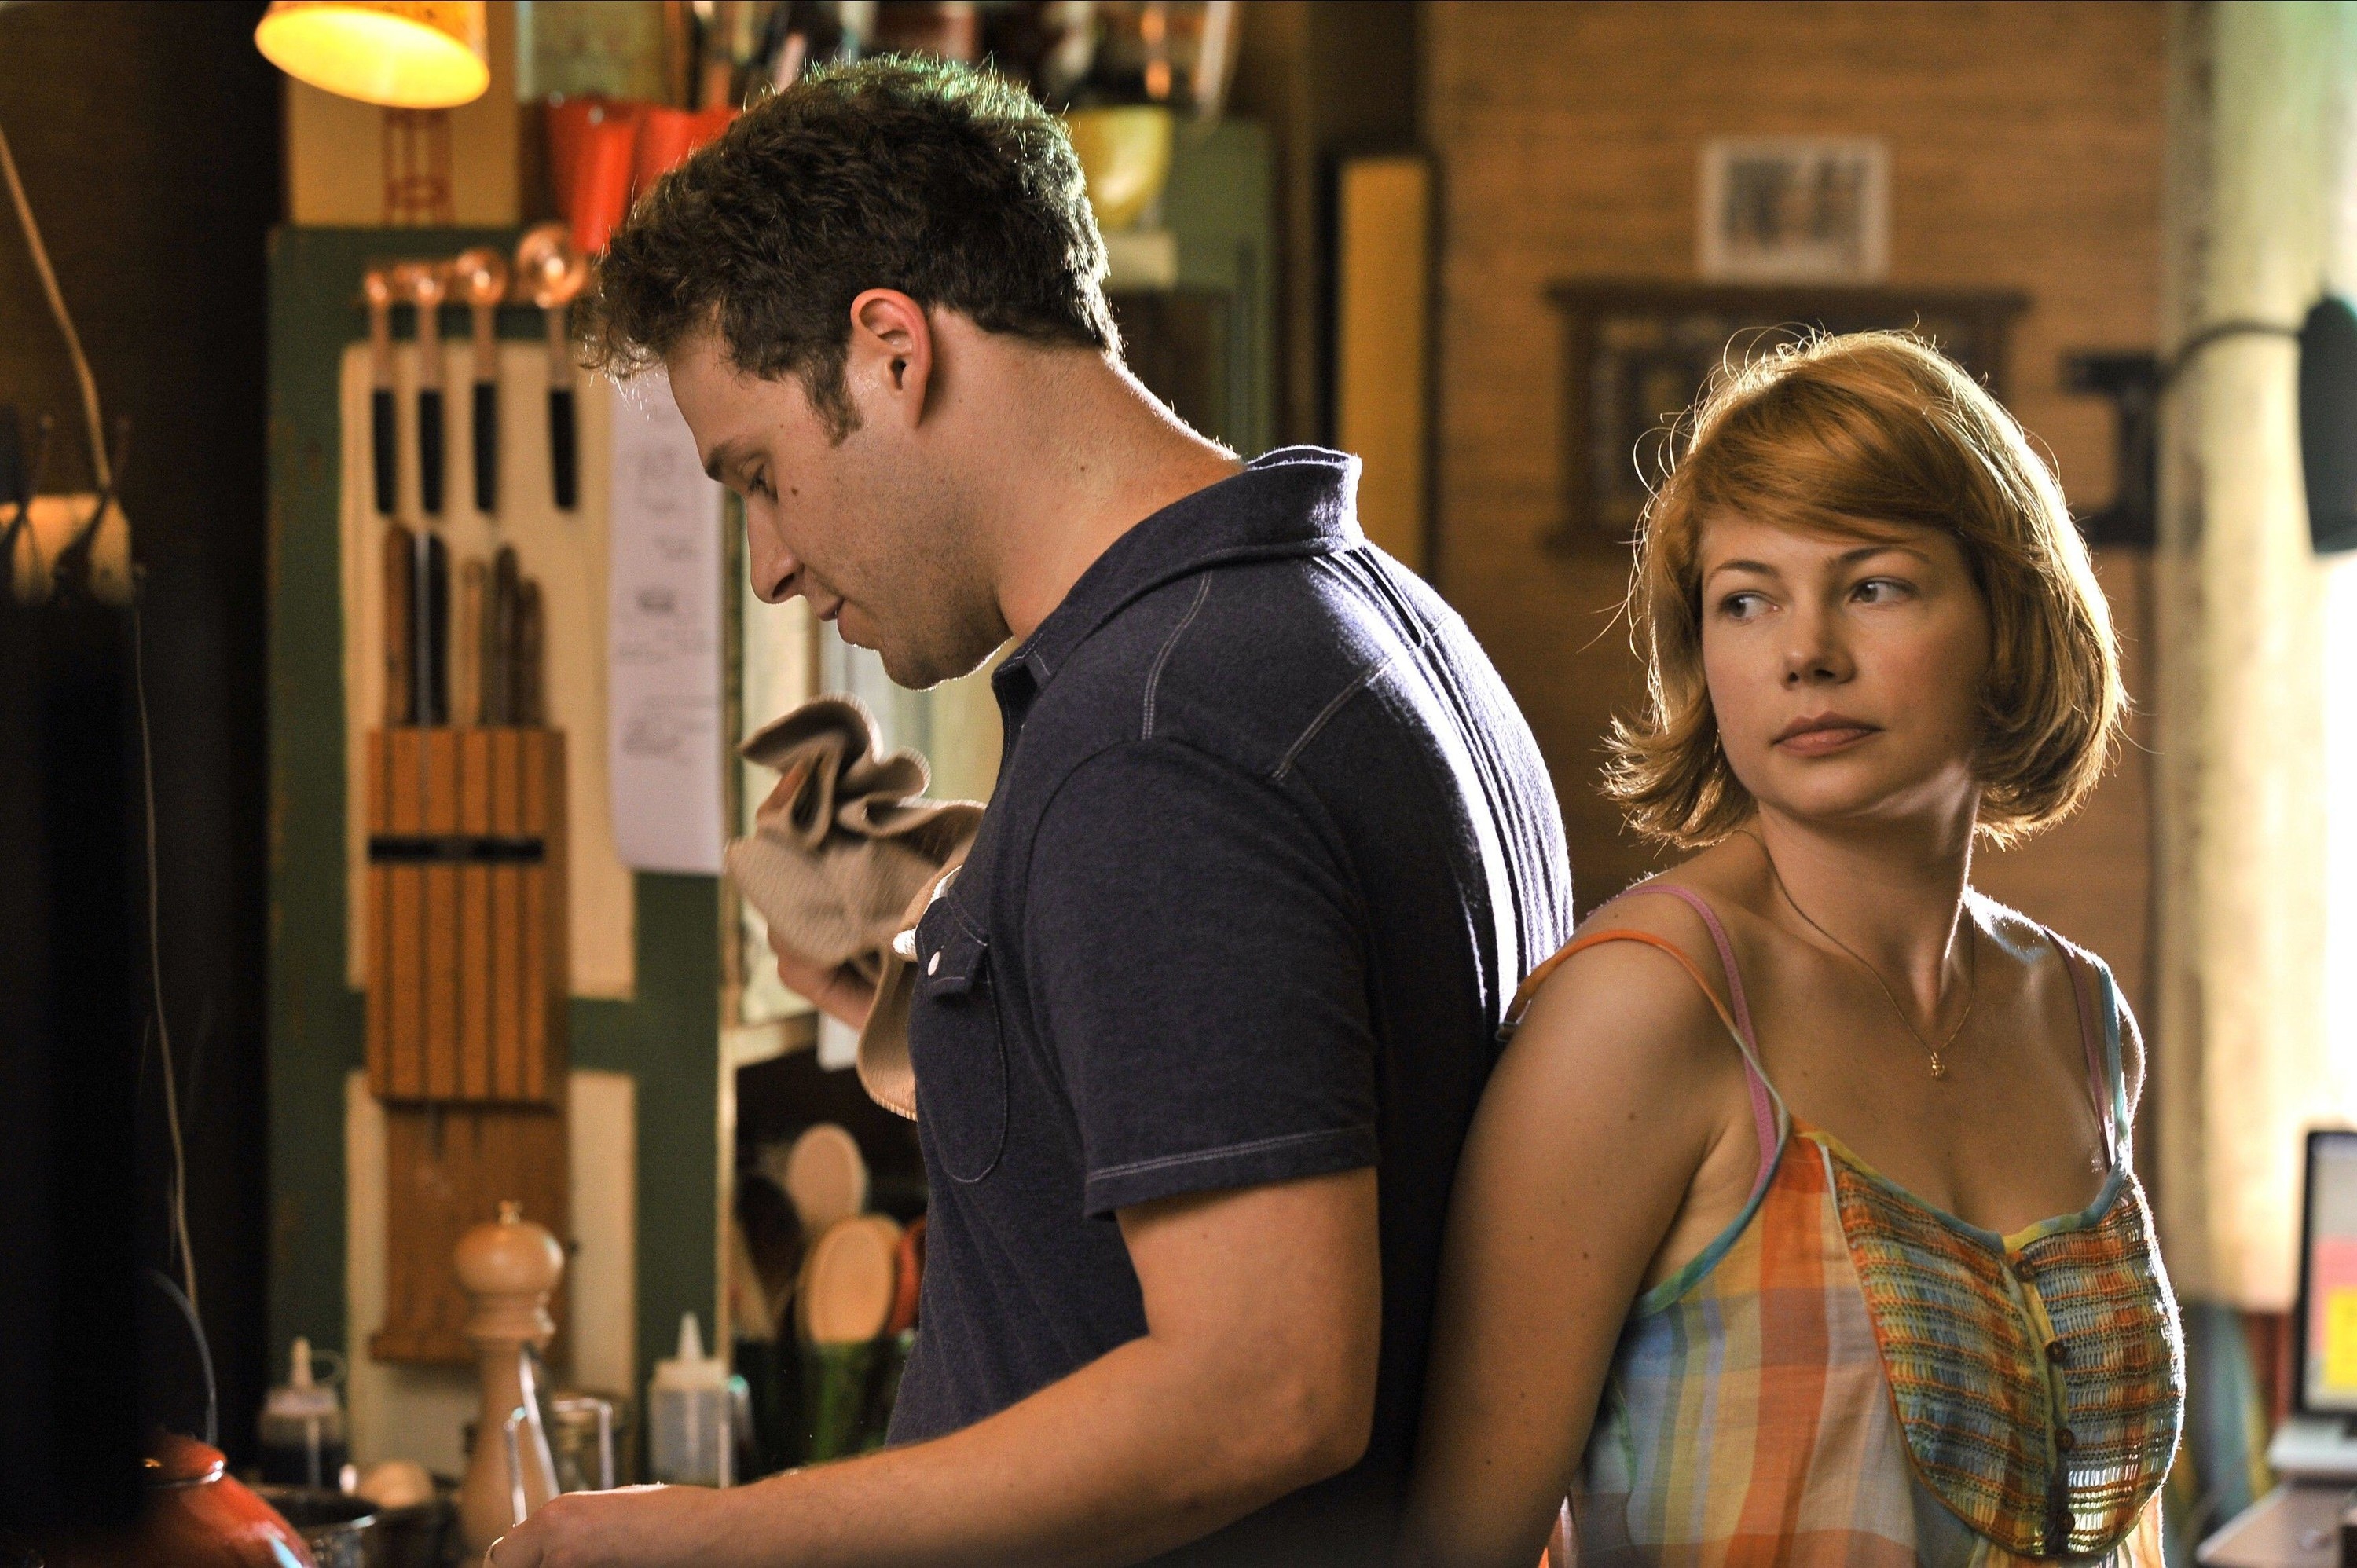 Michelle Williams and Seth Rogen stand back-to-back in a kitchen